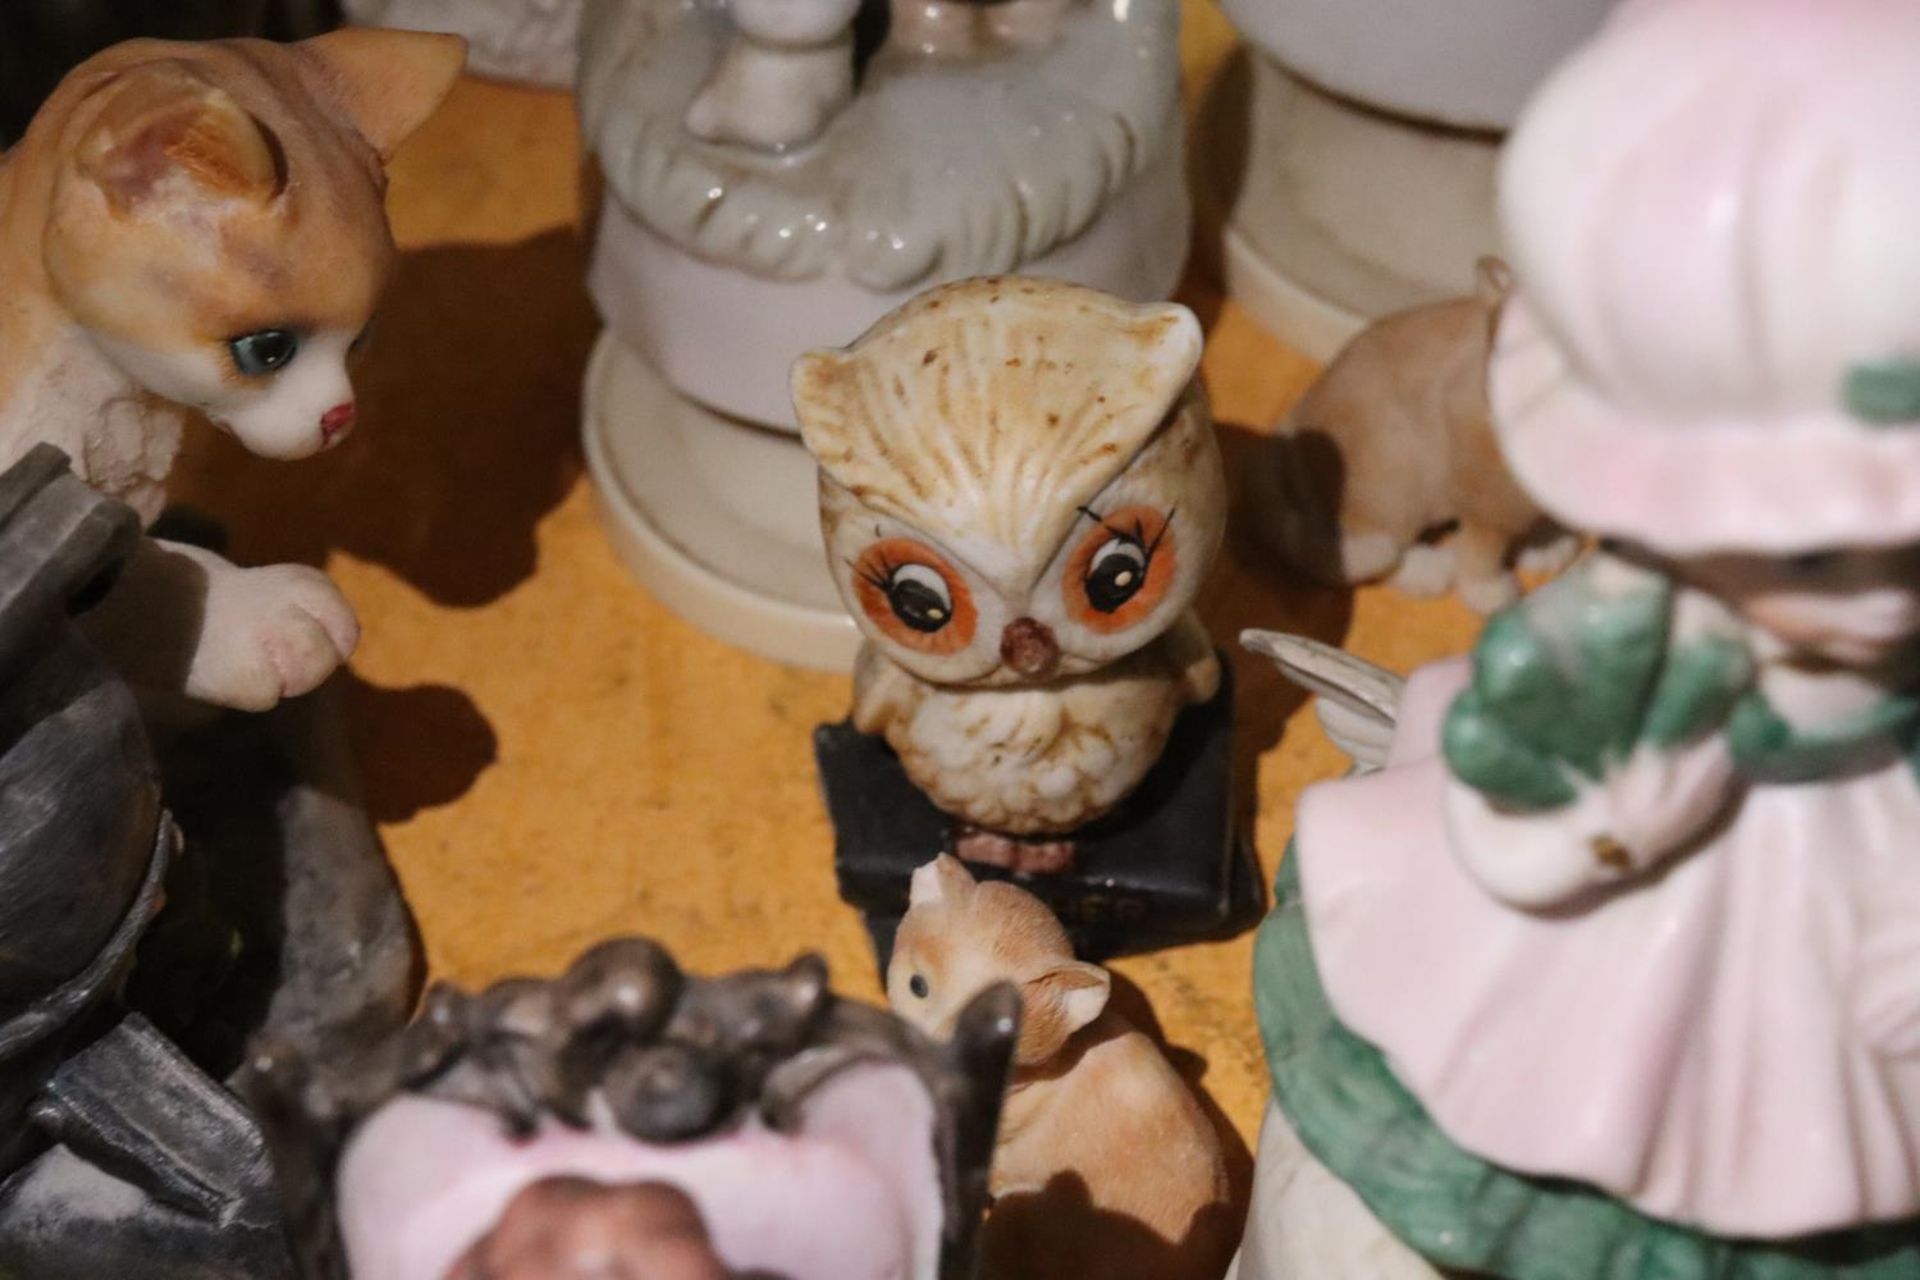 A COLECTION OF CERAMIC ITEMS TO INCLUDE WIND UP BOY AND GIRL, OWLS, CATS, BIRDS ETC - Image 6 of 7